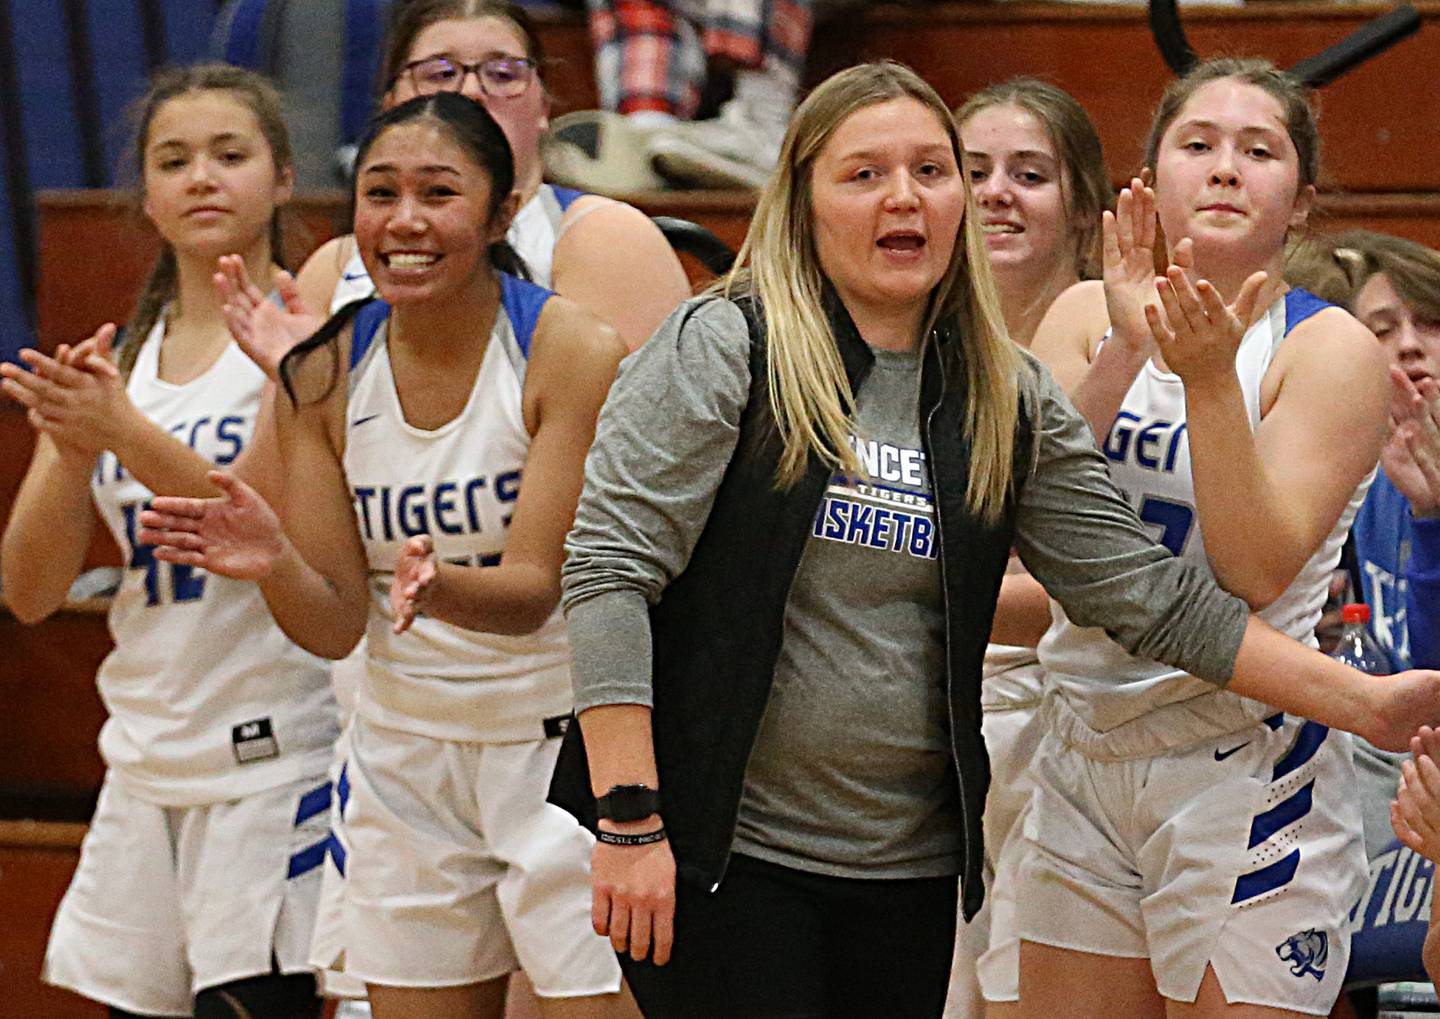 Princeton's head girls basketball coach Darcy Kepner coaches her team in the Lady Tigers Holiday Tournament on Tuesday, Nov. 15, 2022 in Princeton.